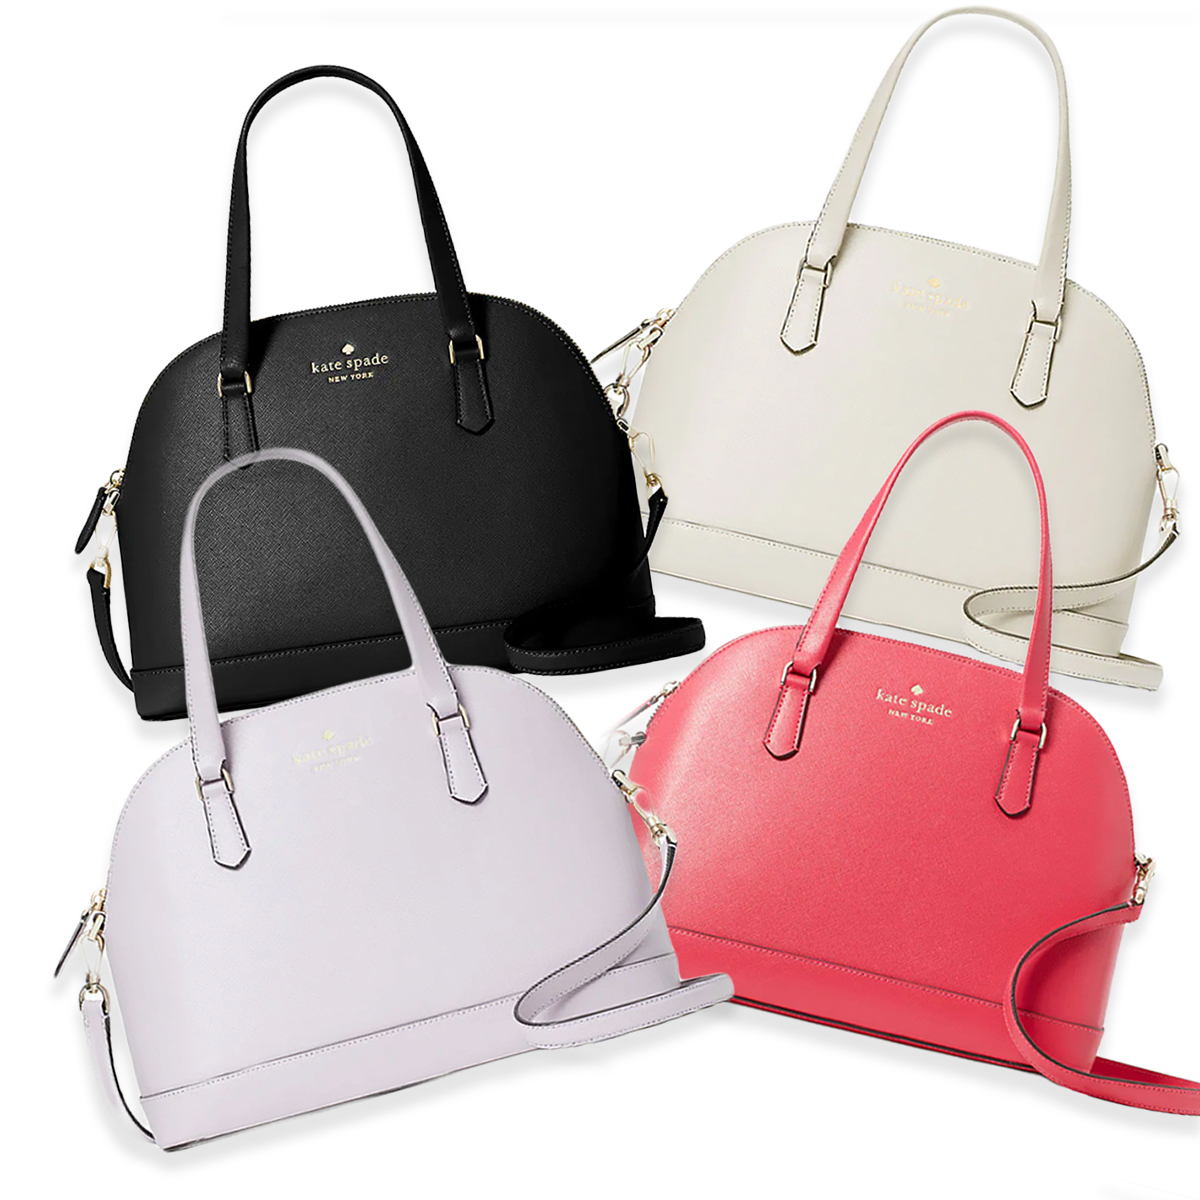 Kate Spade 24-Hour Flash Deal: Get This $400 Satchel Bag for Just $99